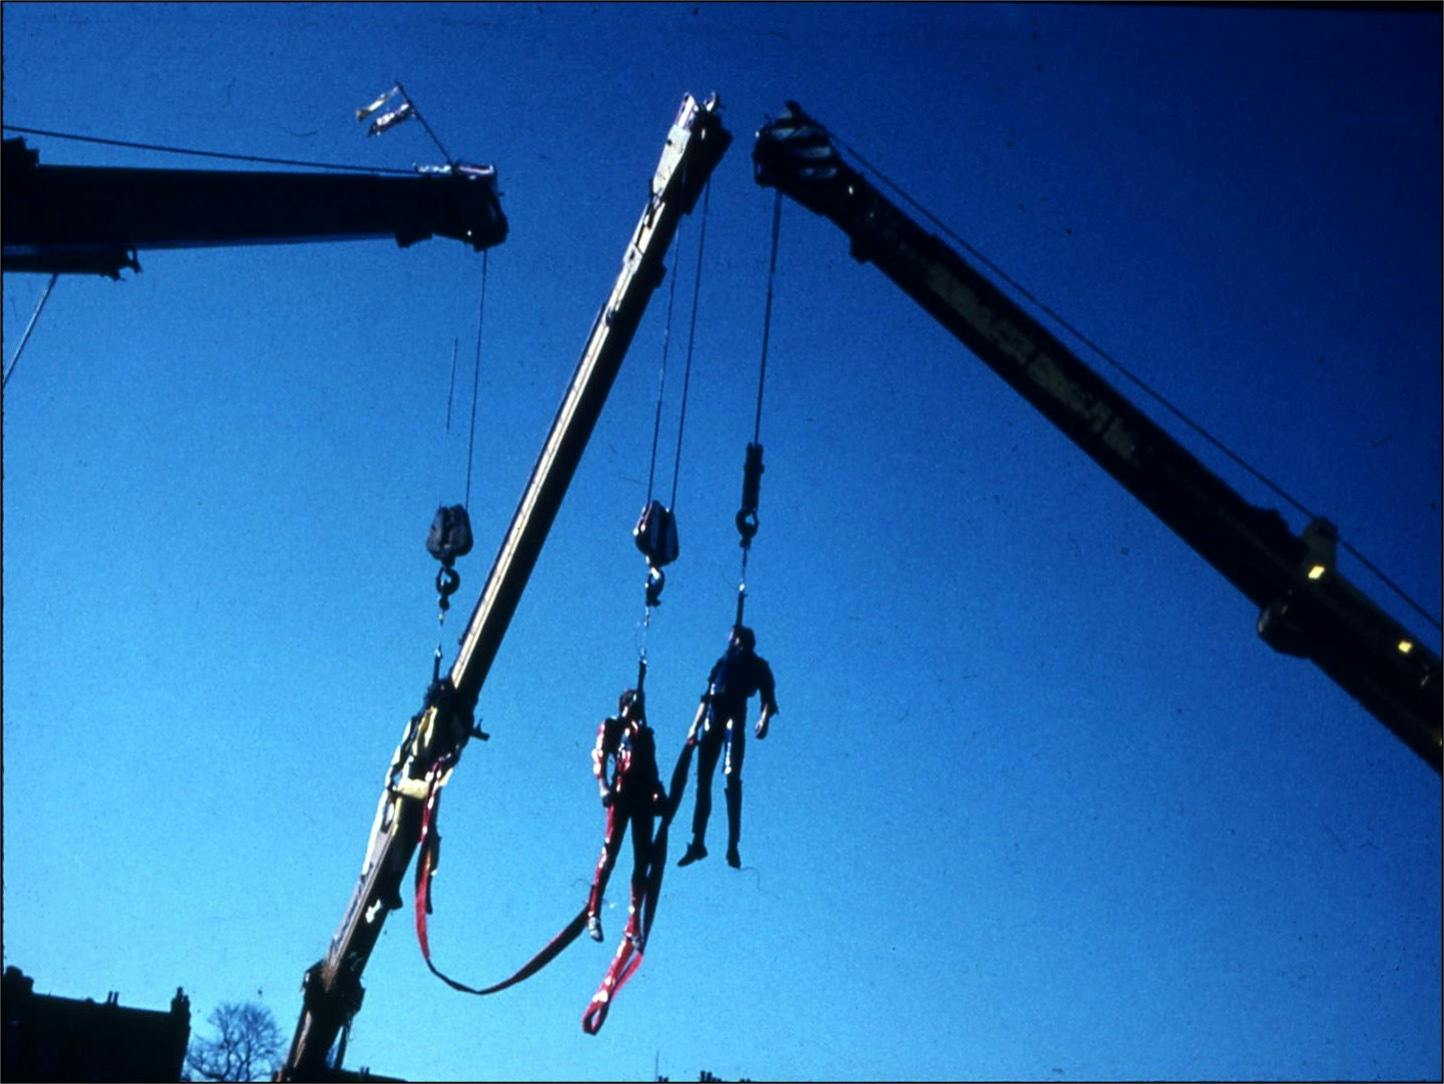 A blue-tinted photograph in landscape orientation. Taken from the ground, the photo shows three performers suspended in the air from harnesses attached to the arms of three mobile cranes. The performers hang loosely, connected to one another by thick bands of red ribbon trailing down from their harnesses.